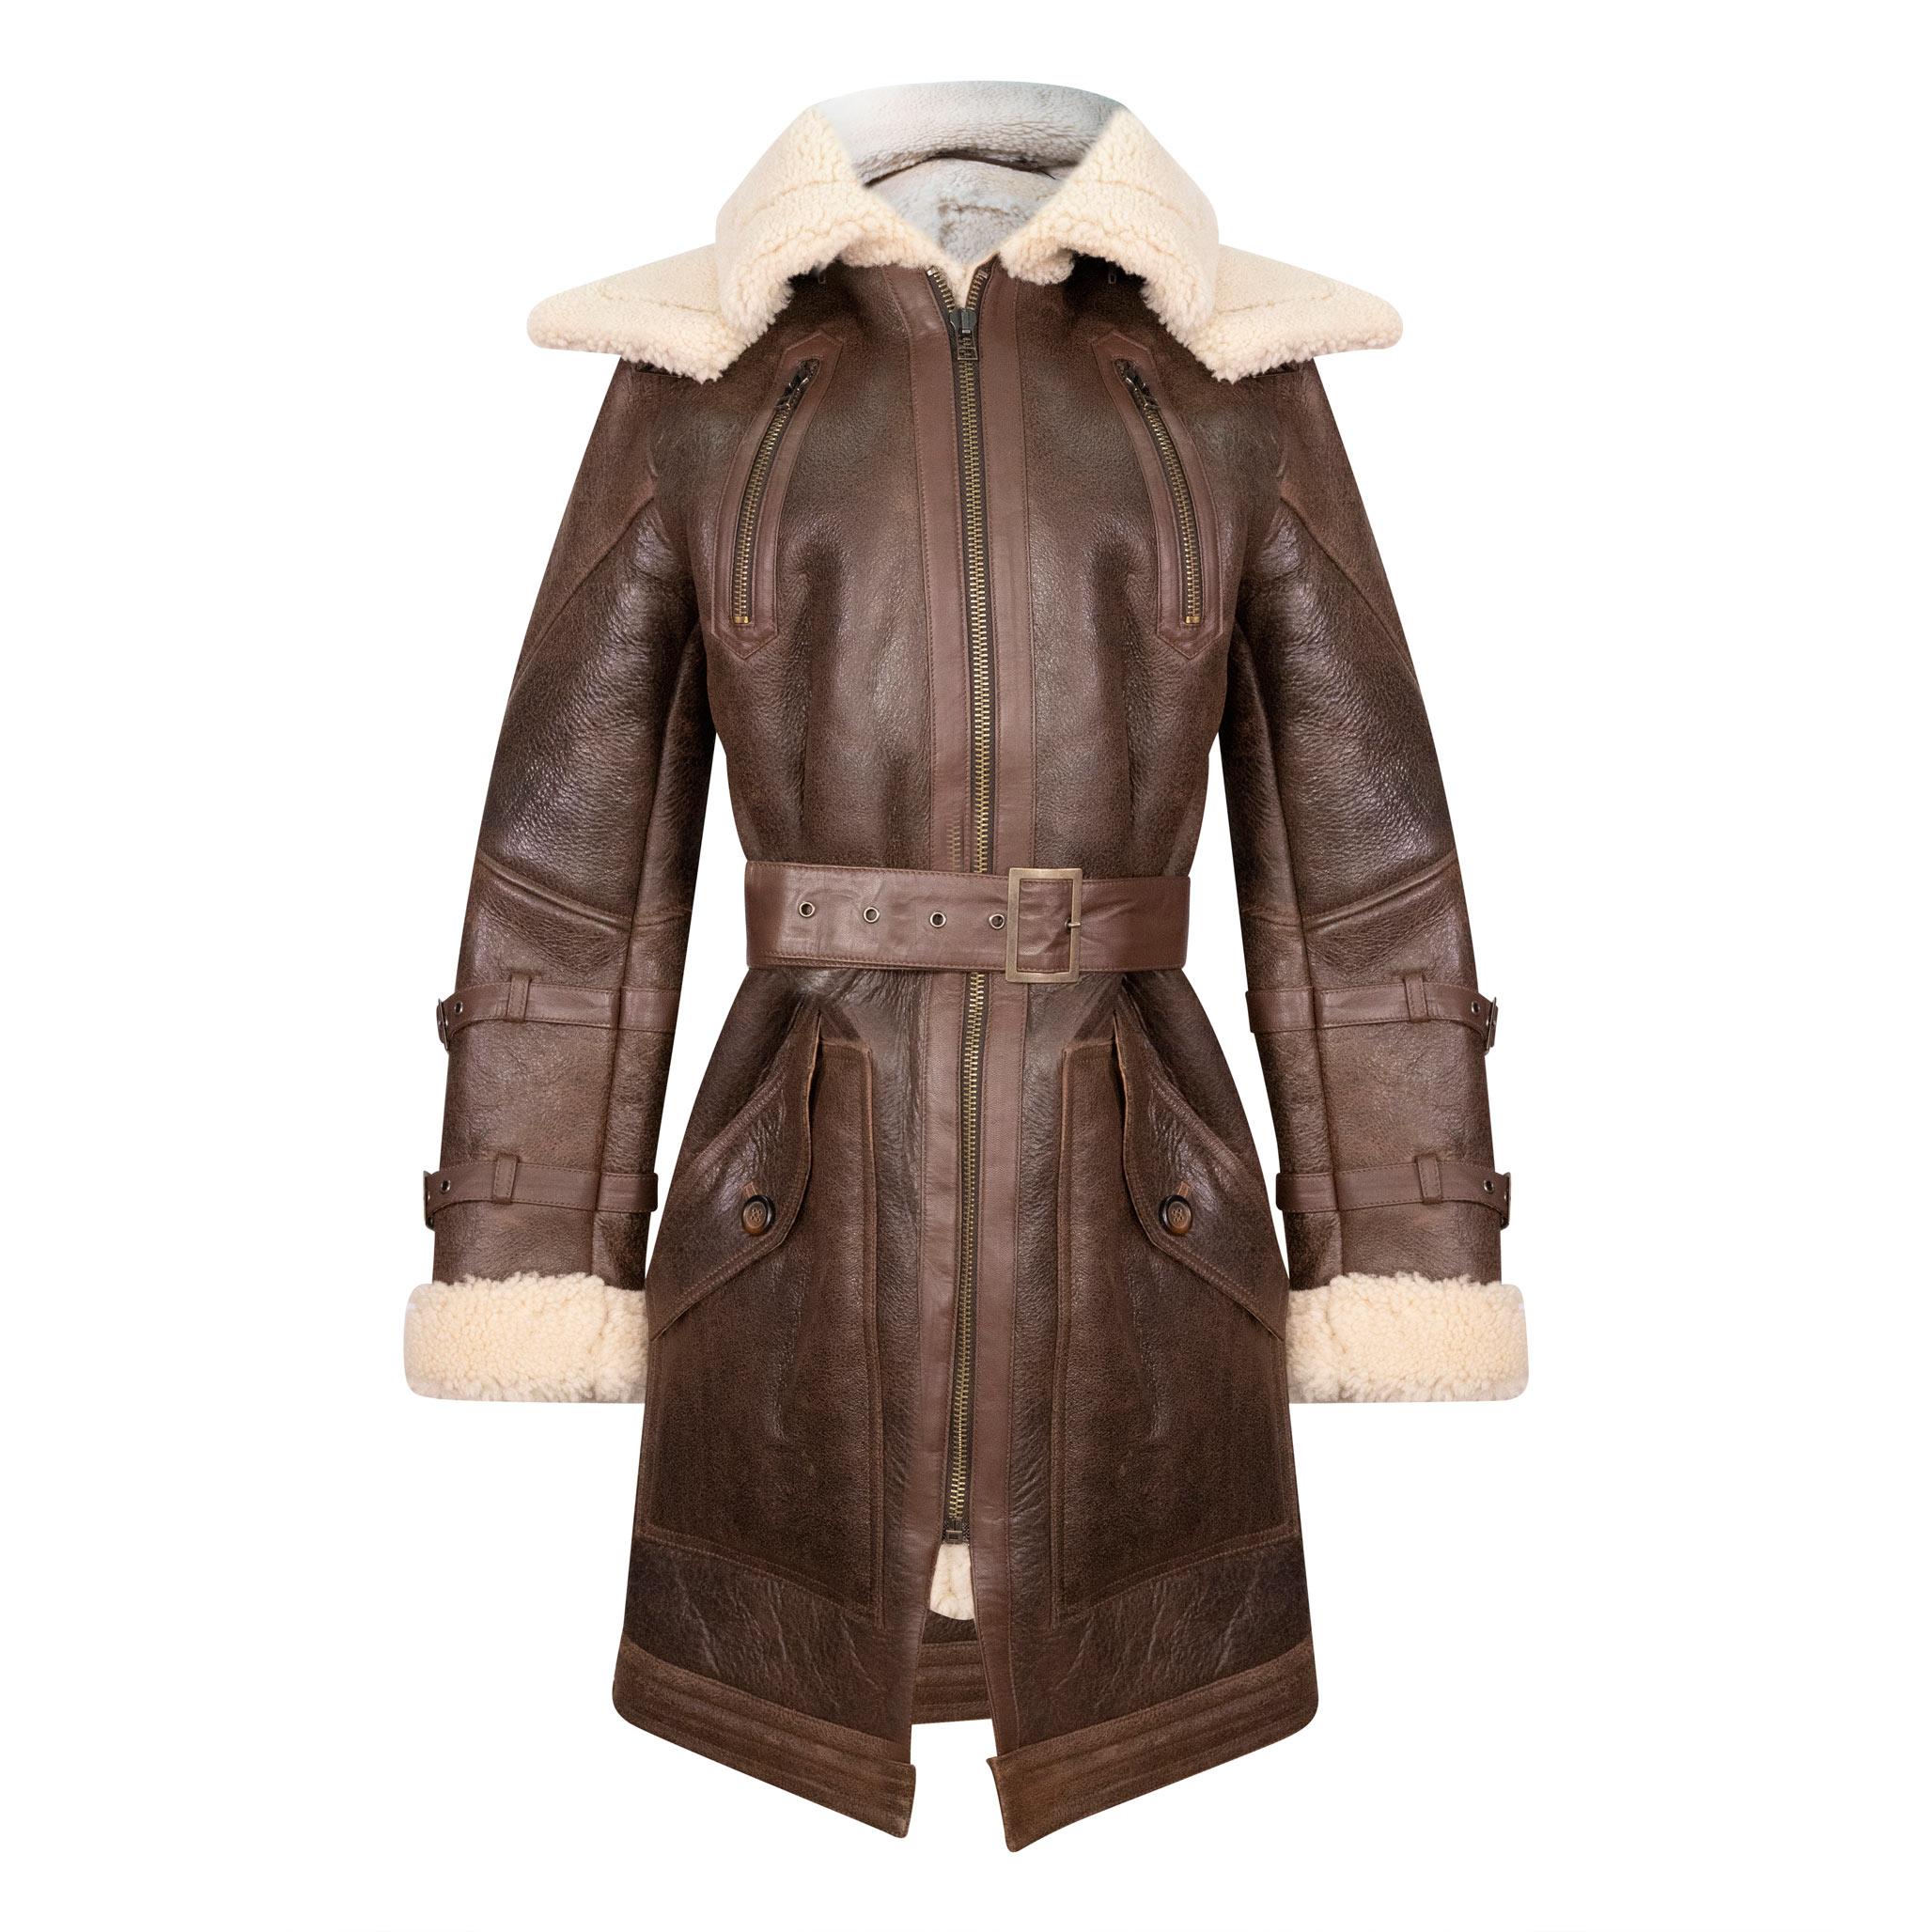 An striking long brown sheepskin trench coat with a cream fur interior